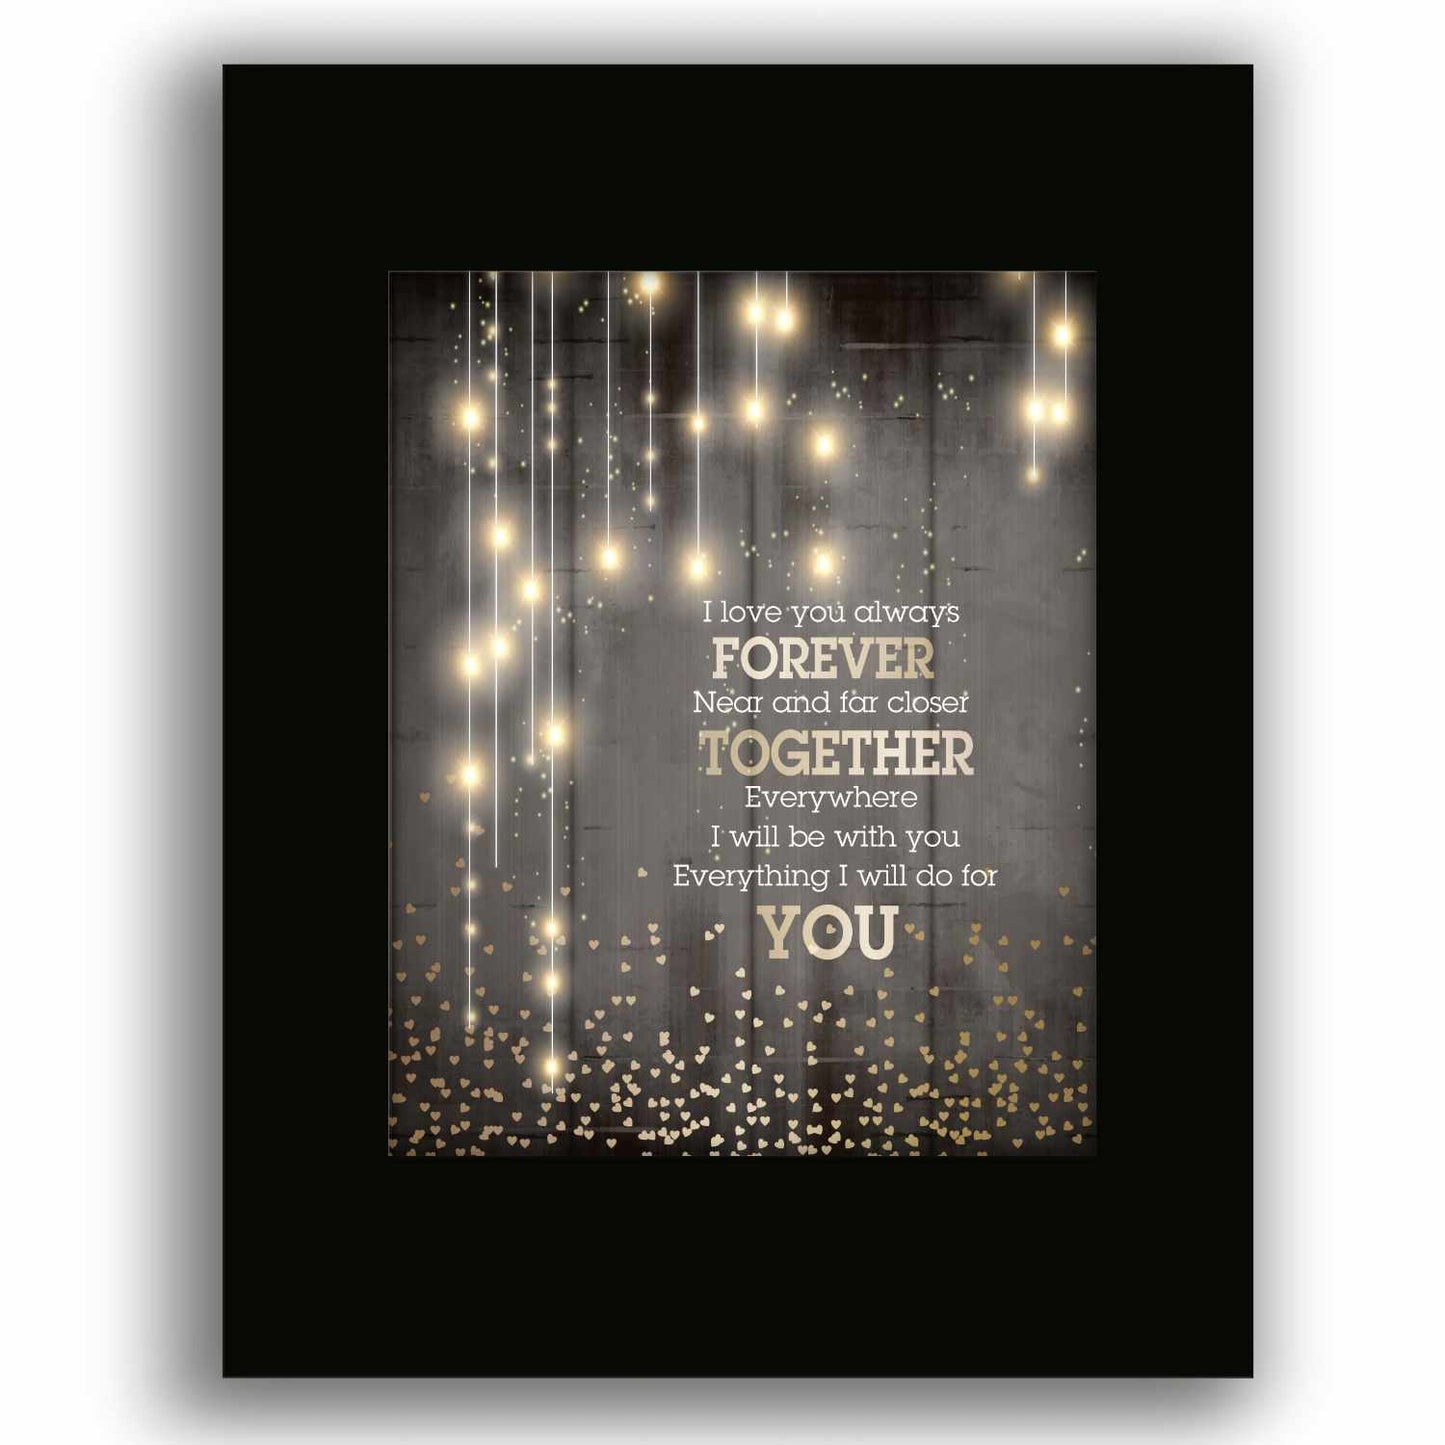 I Love You Always Forever - Donna Lewis Pop Song Lyric Print Song Lyrics Art Song Lyrics Art 